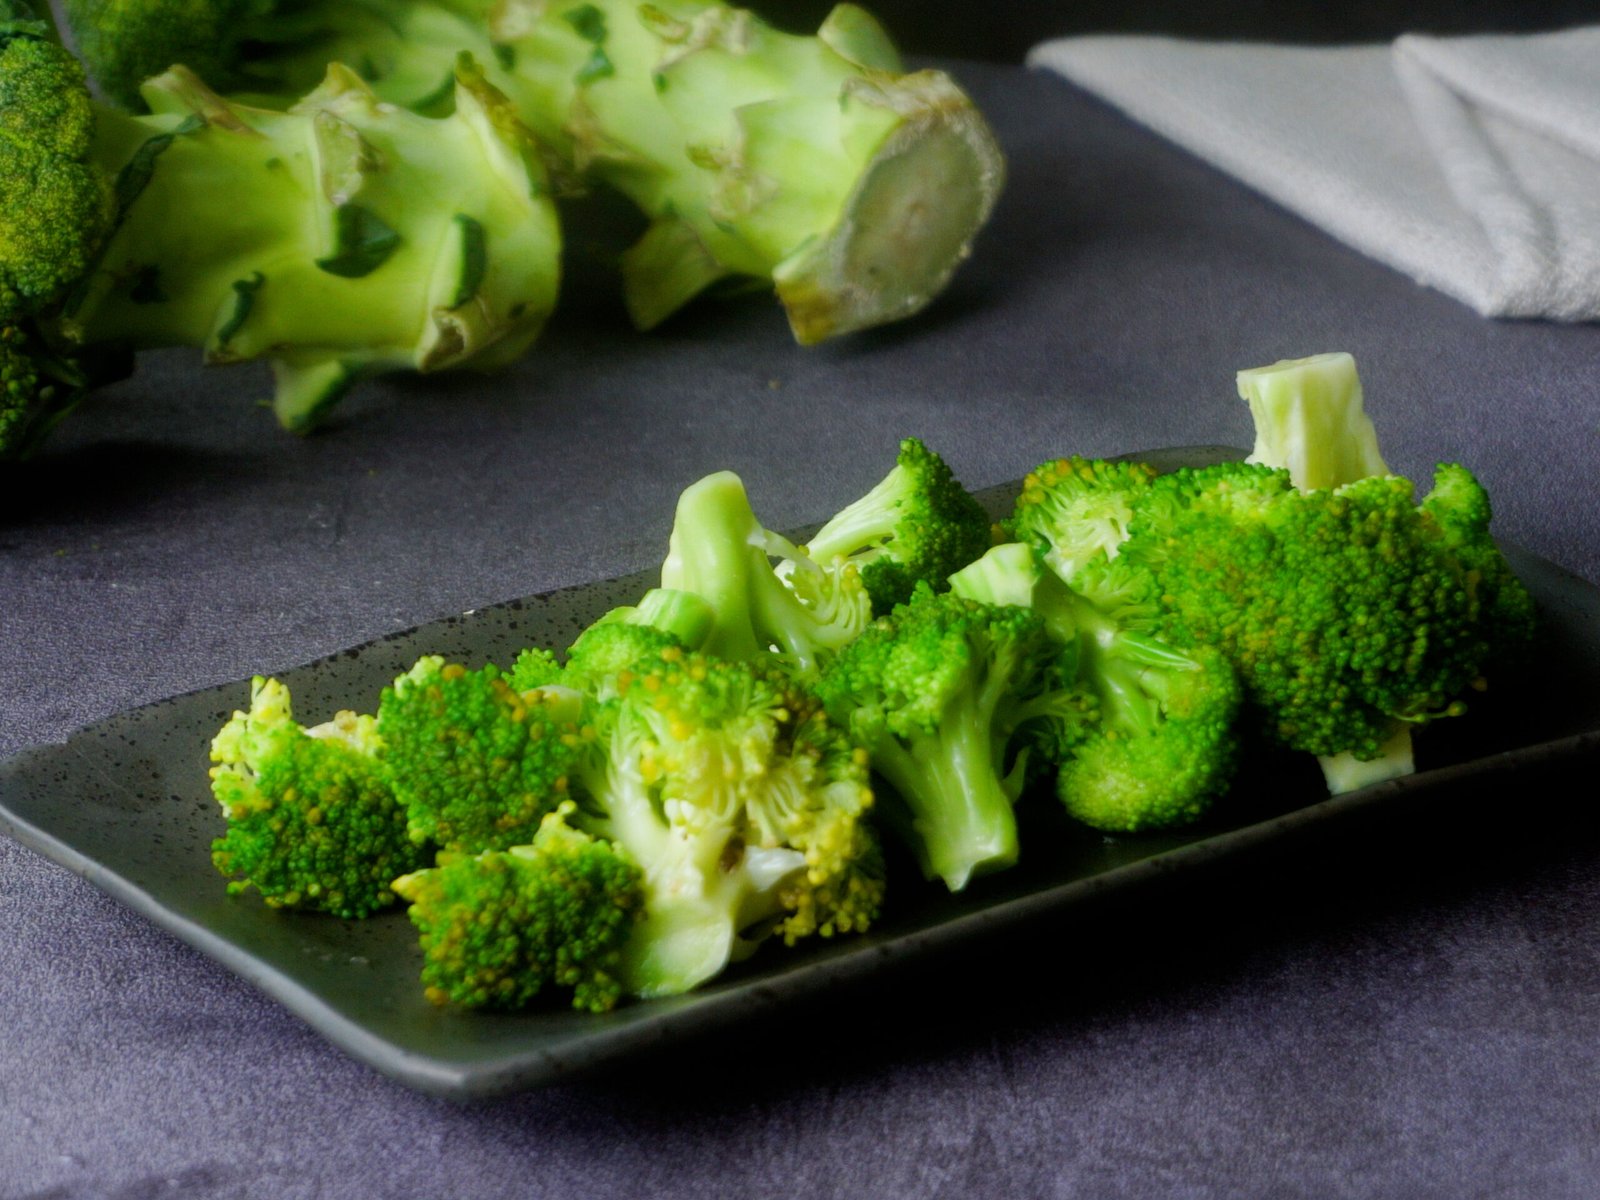 Recognize the Benefits of Broccoli for Gout